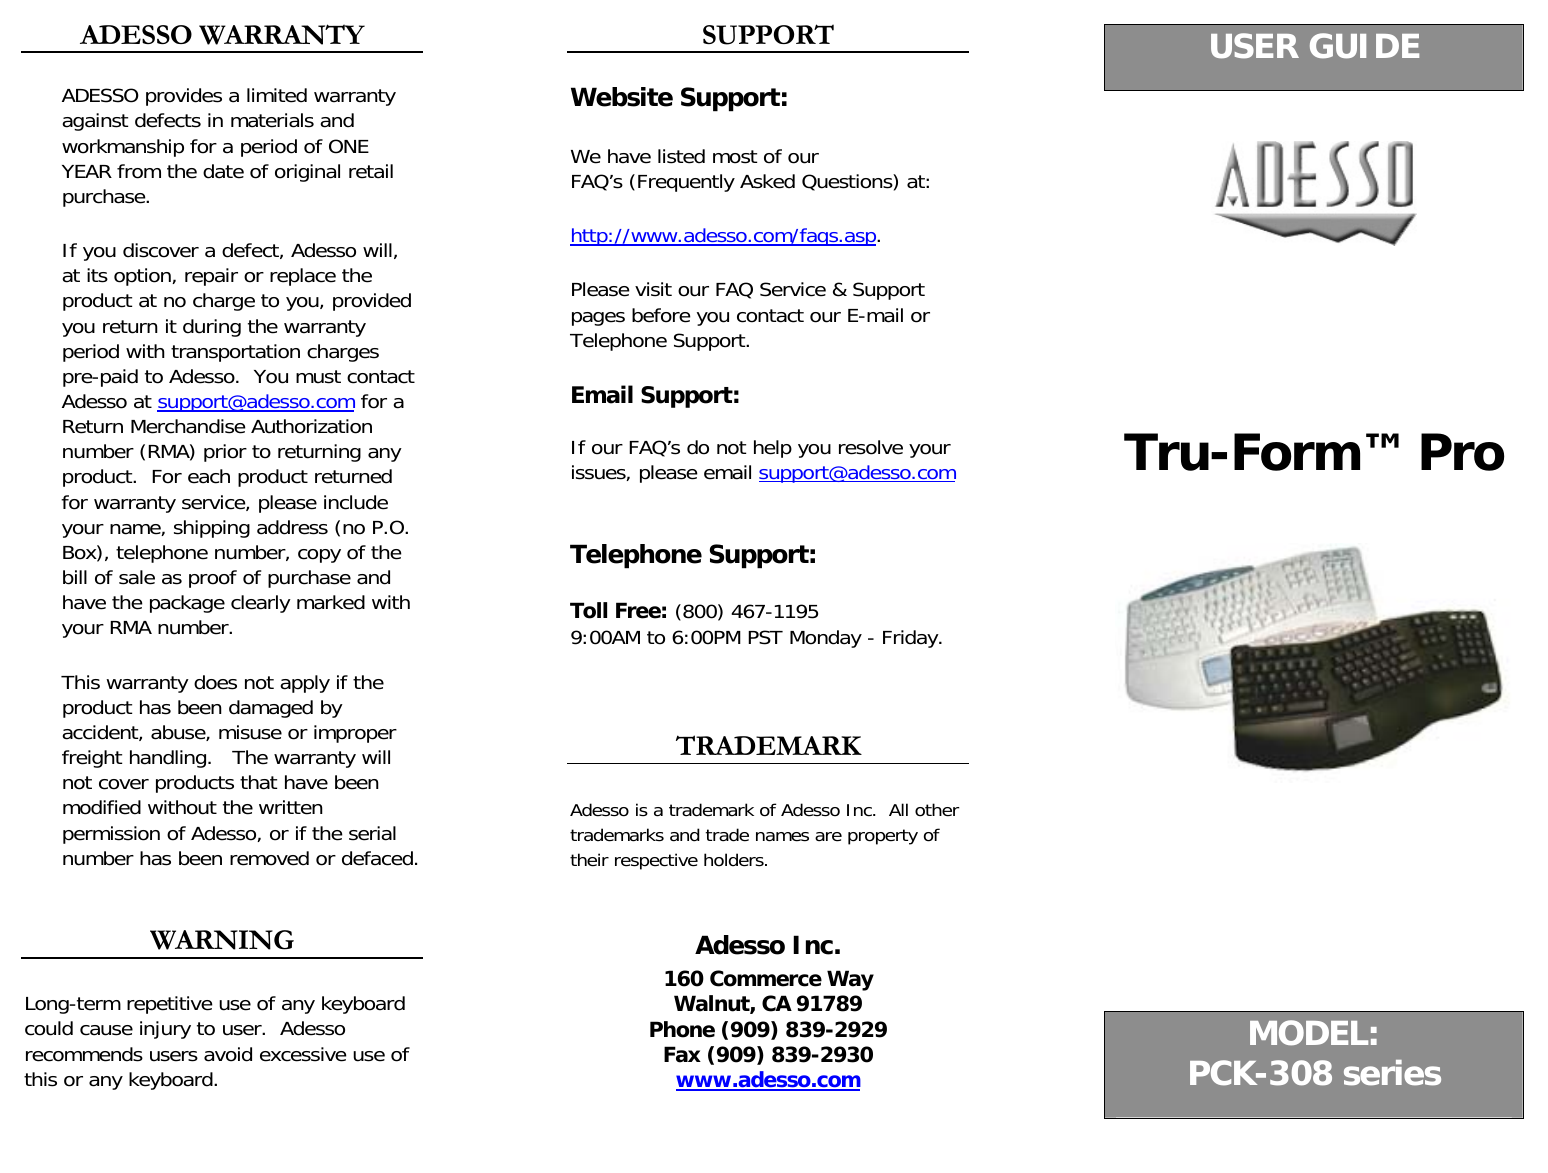 Page 1 of 3 - Adesso Adesso-Tru-Form-Pck-308-Users-Manual PCK- 308 Users Guide